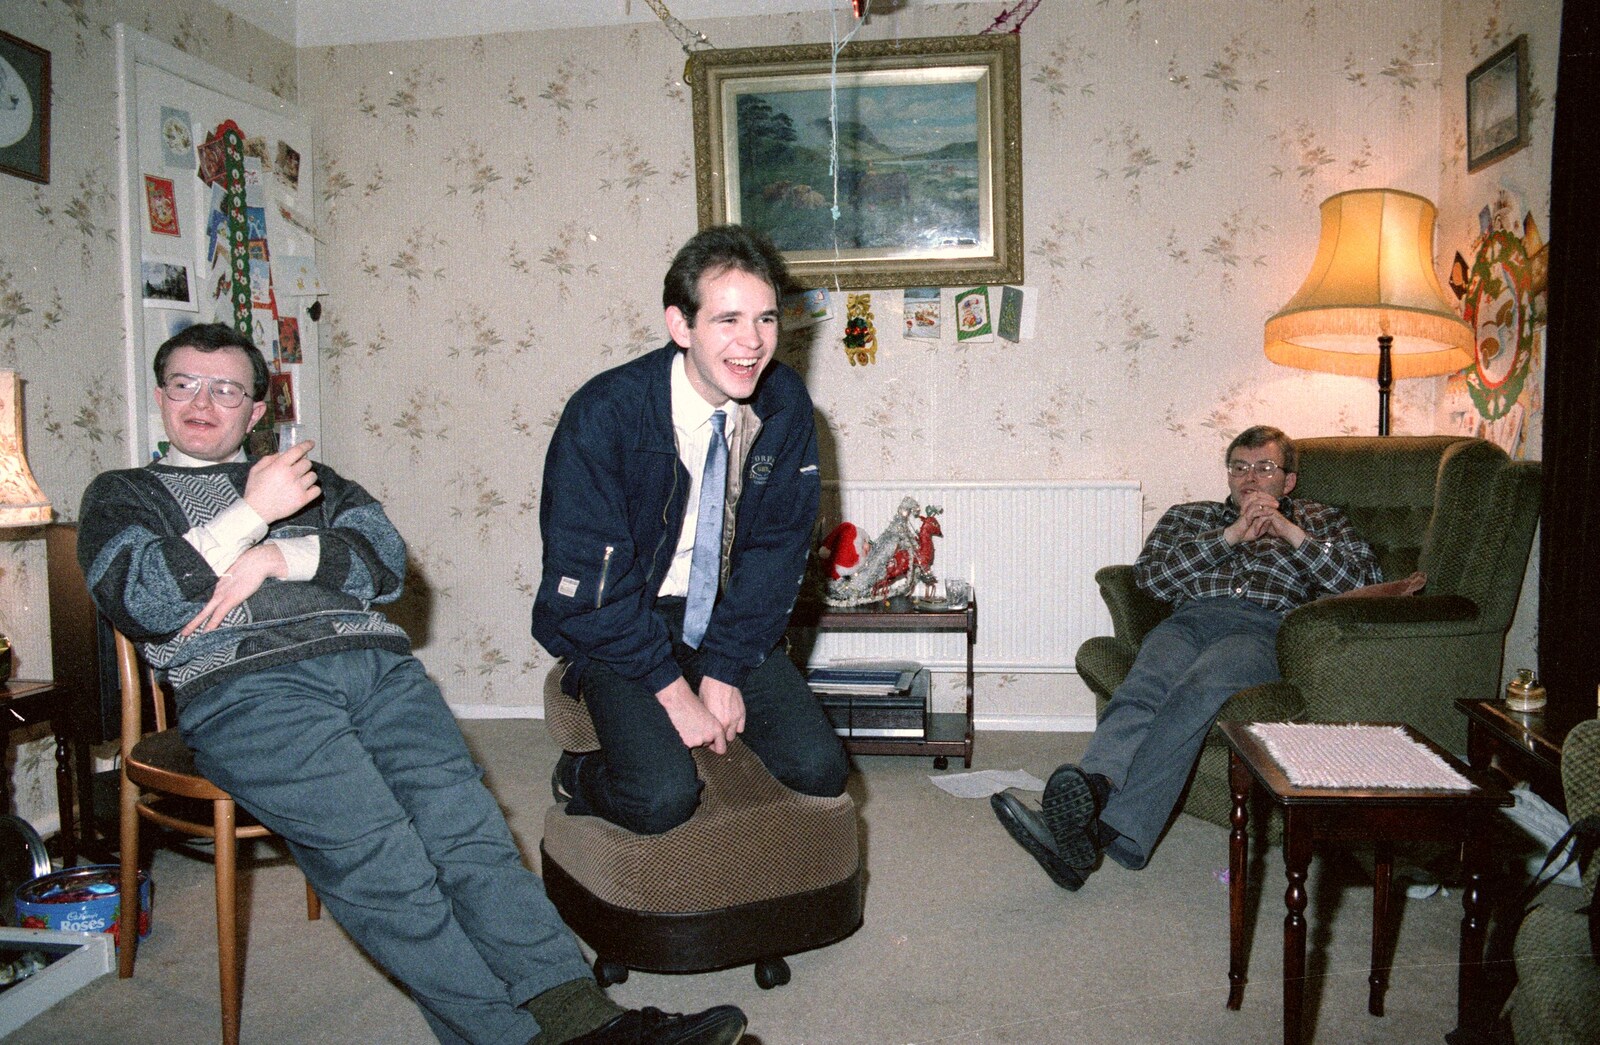 Phil has a laugh from New Year's Eve at Hamish's, New Milton, Hampshire - 31st December 1988